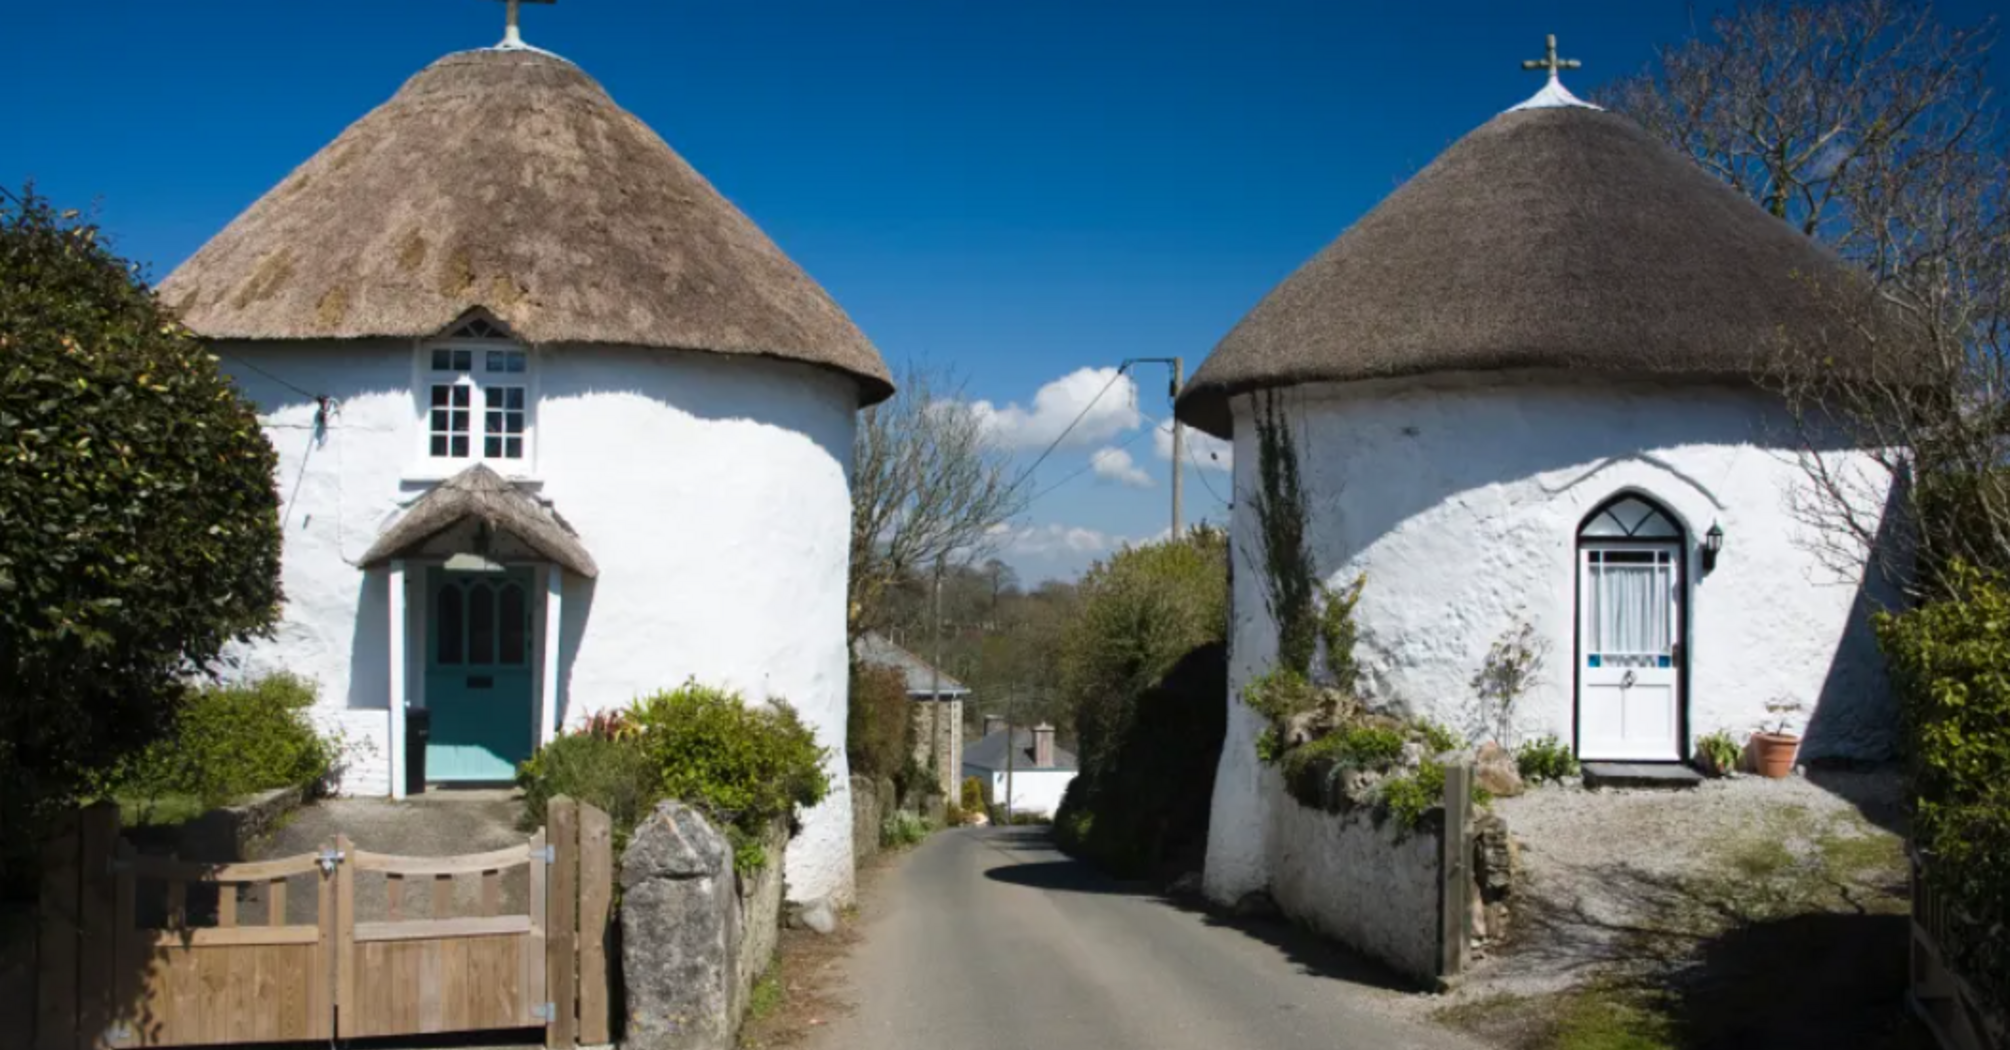 Round houses are a symbol of Veryan